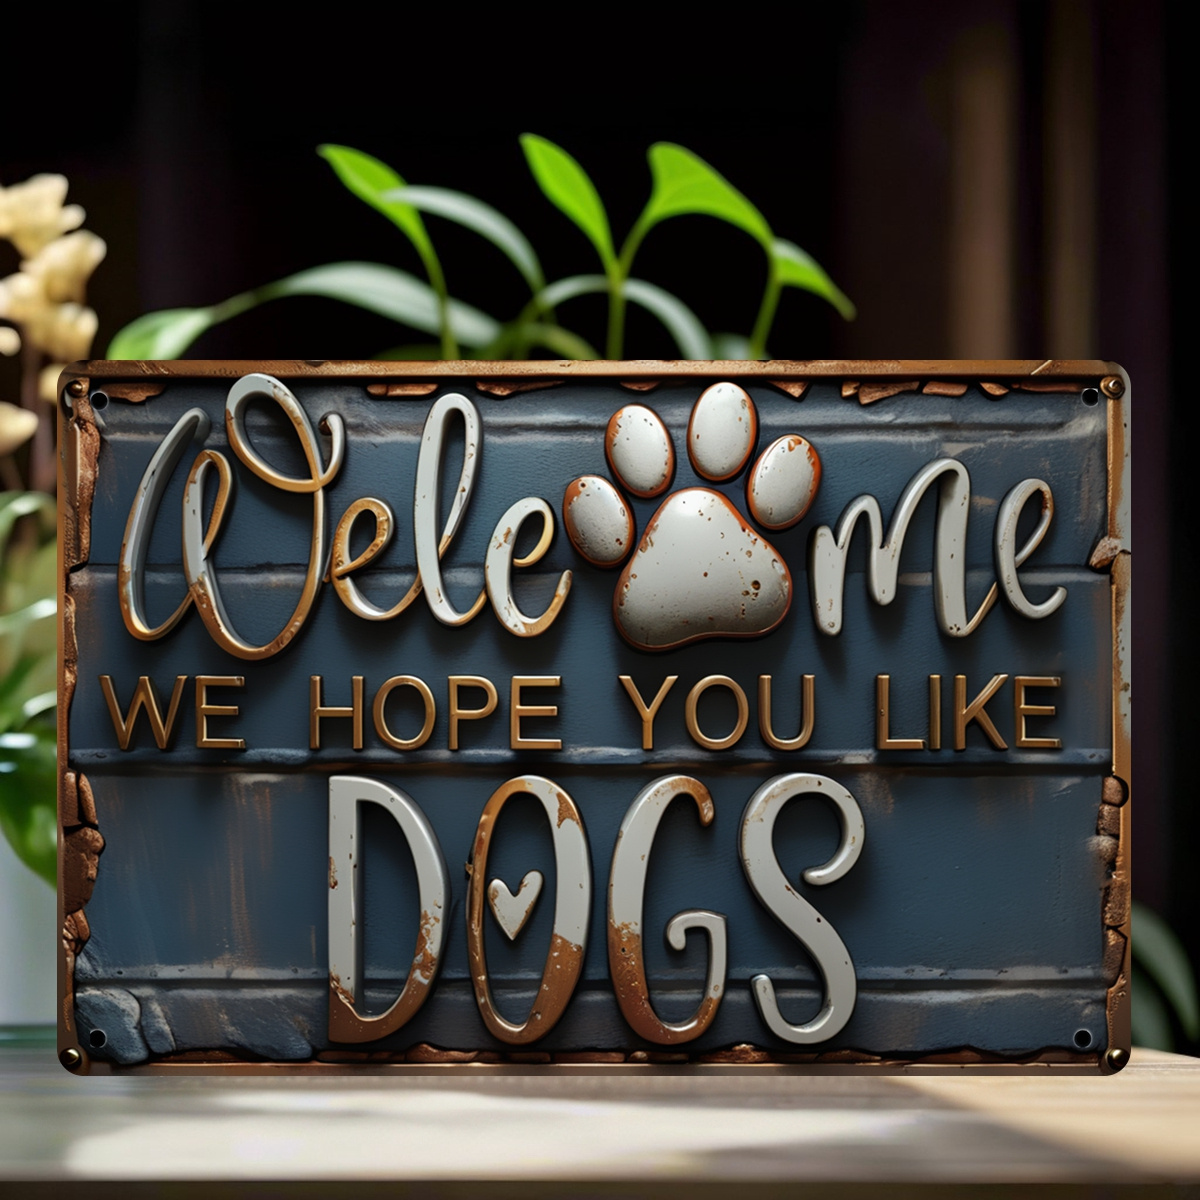 

Vintage-style 'welcome, I Hope You Like Dogs' Metal Sign - Perfect For Home, Kitchen, Bar, Cafe & For Man Cave Decor, Indoor/outdoor Use, 8x12 Inches